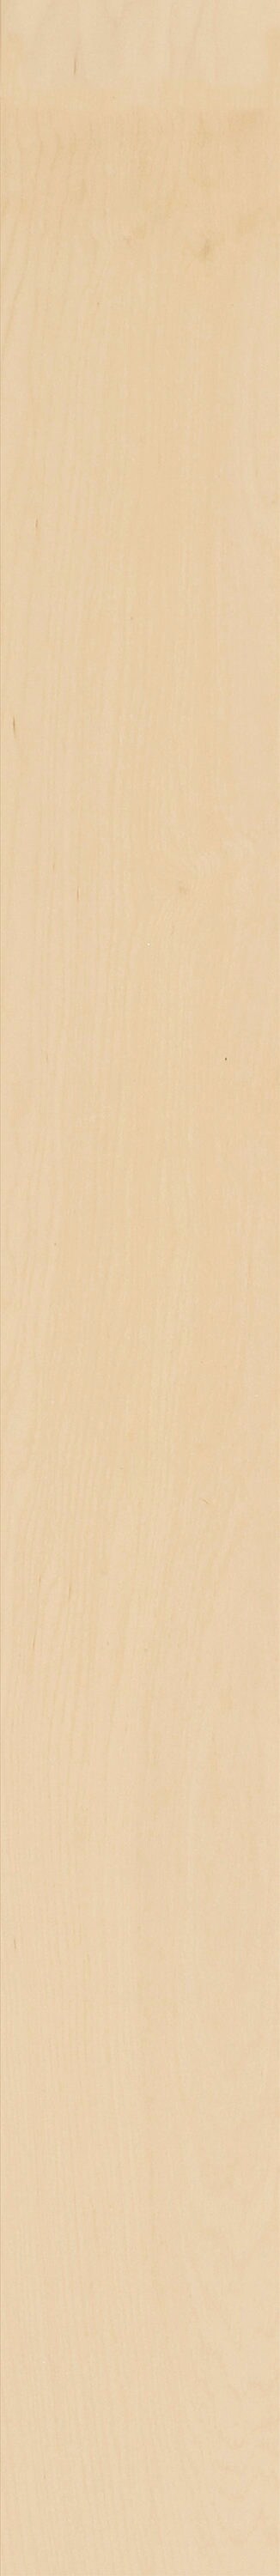 SMARTCORE Naturals Bluegrass Trail Maple 5-in W x 1/4-in T x Varying ...